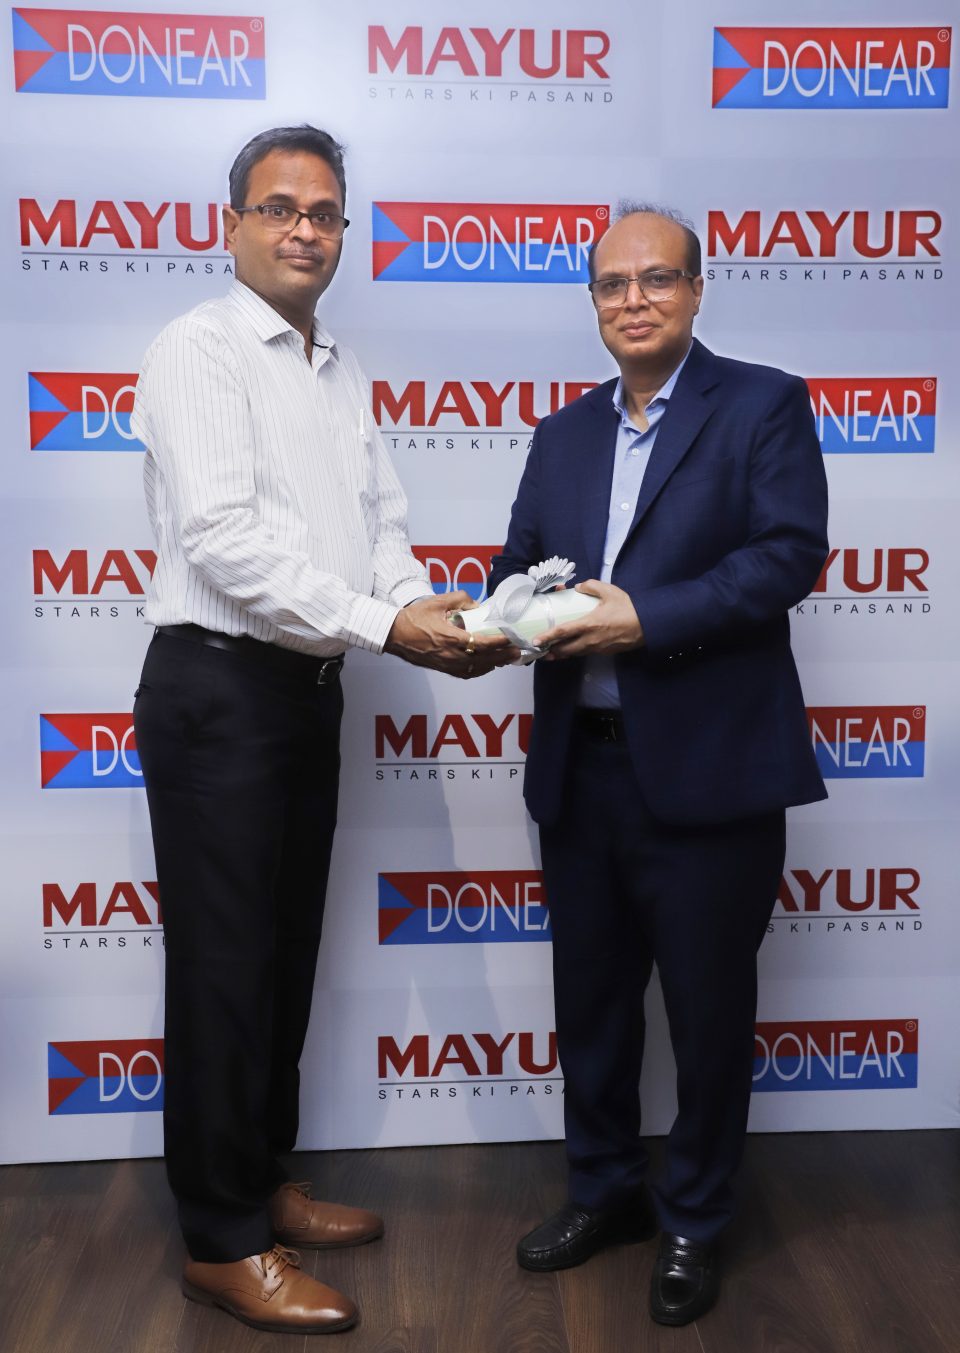 DONEAR GROUP ACQUIRES MAYUR BRAND